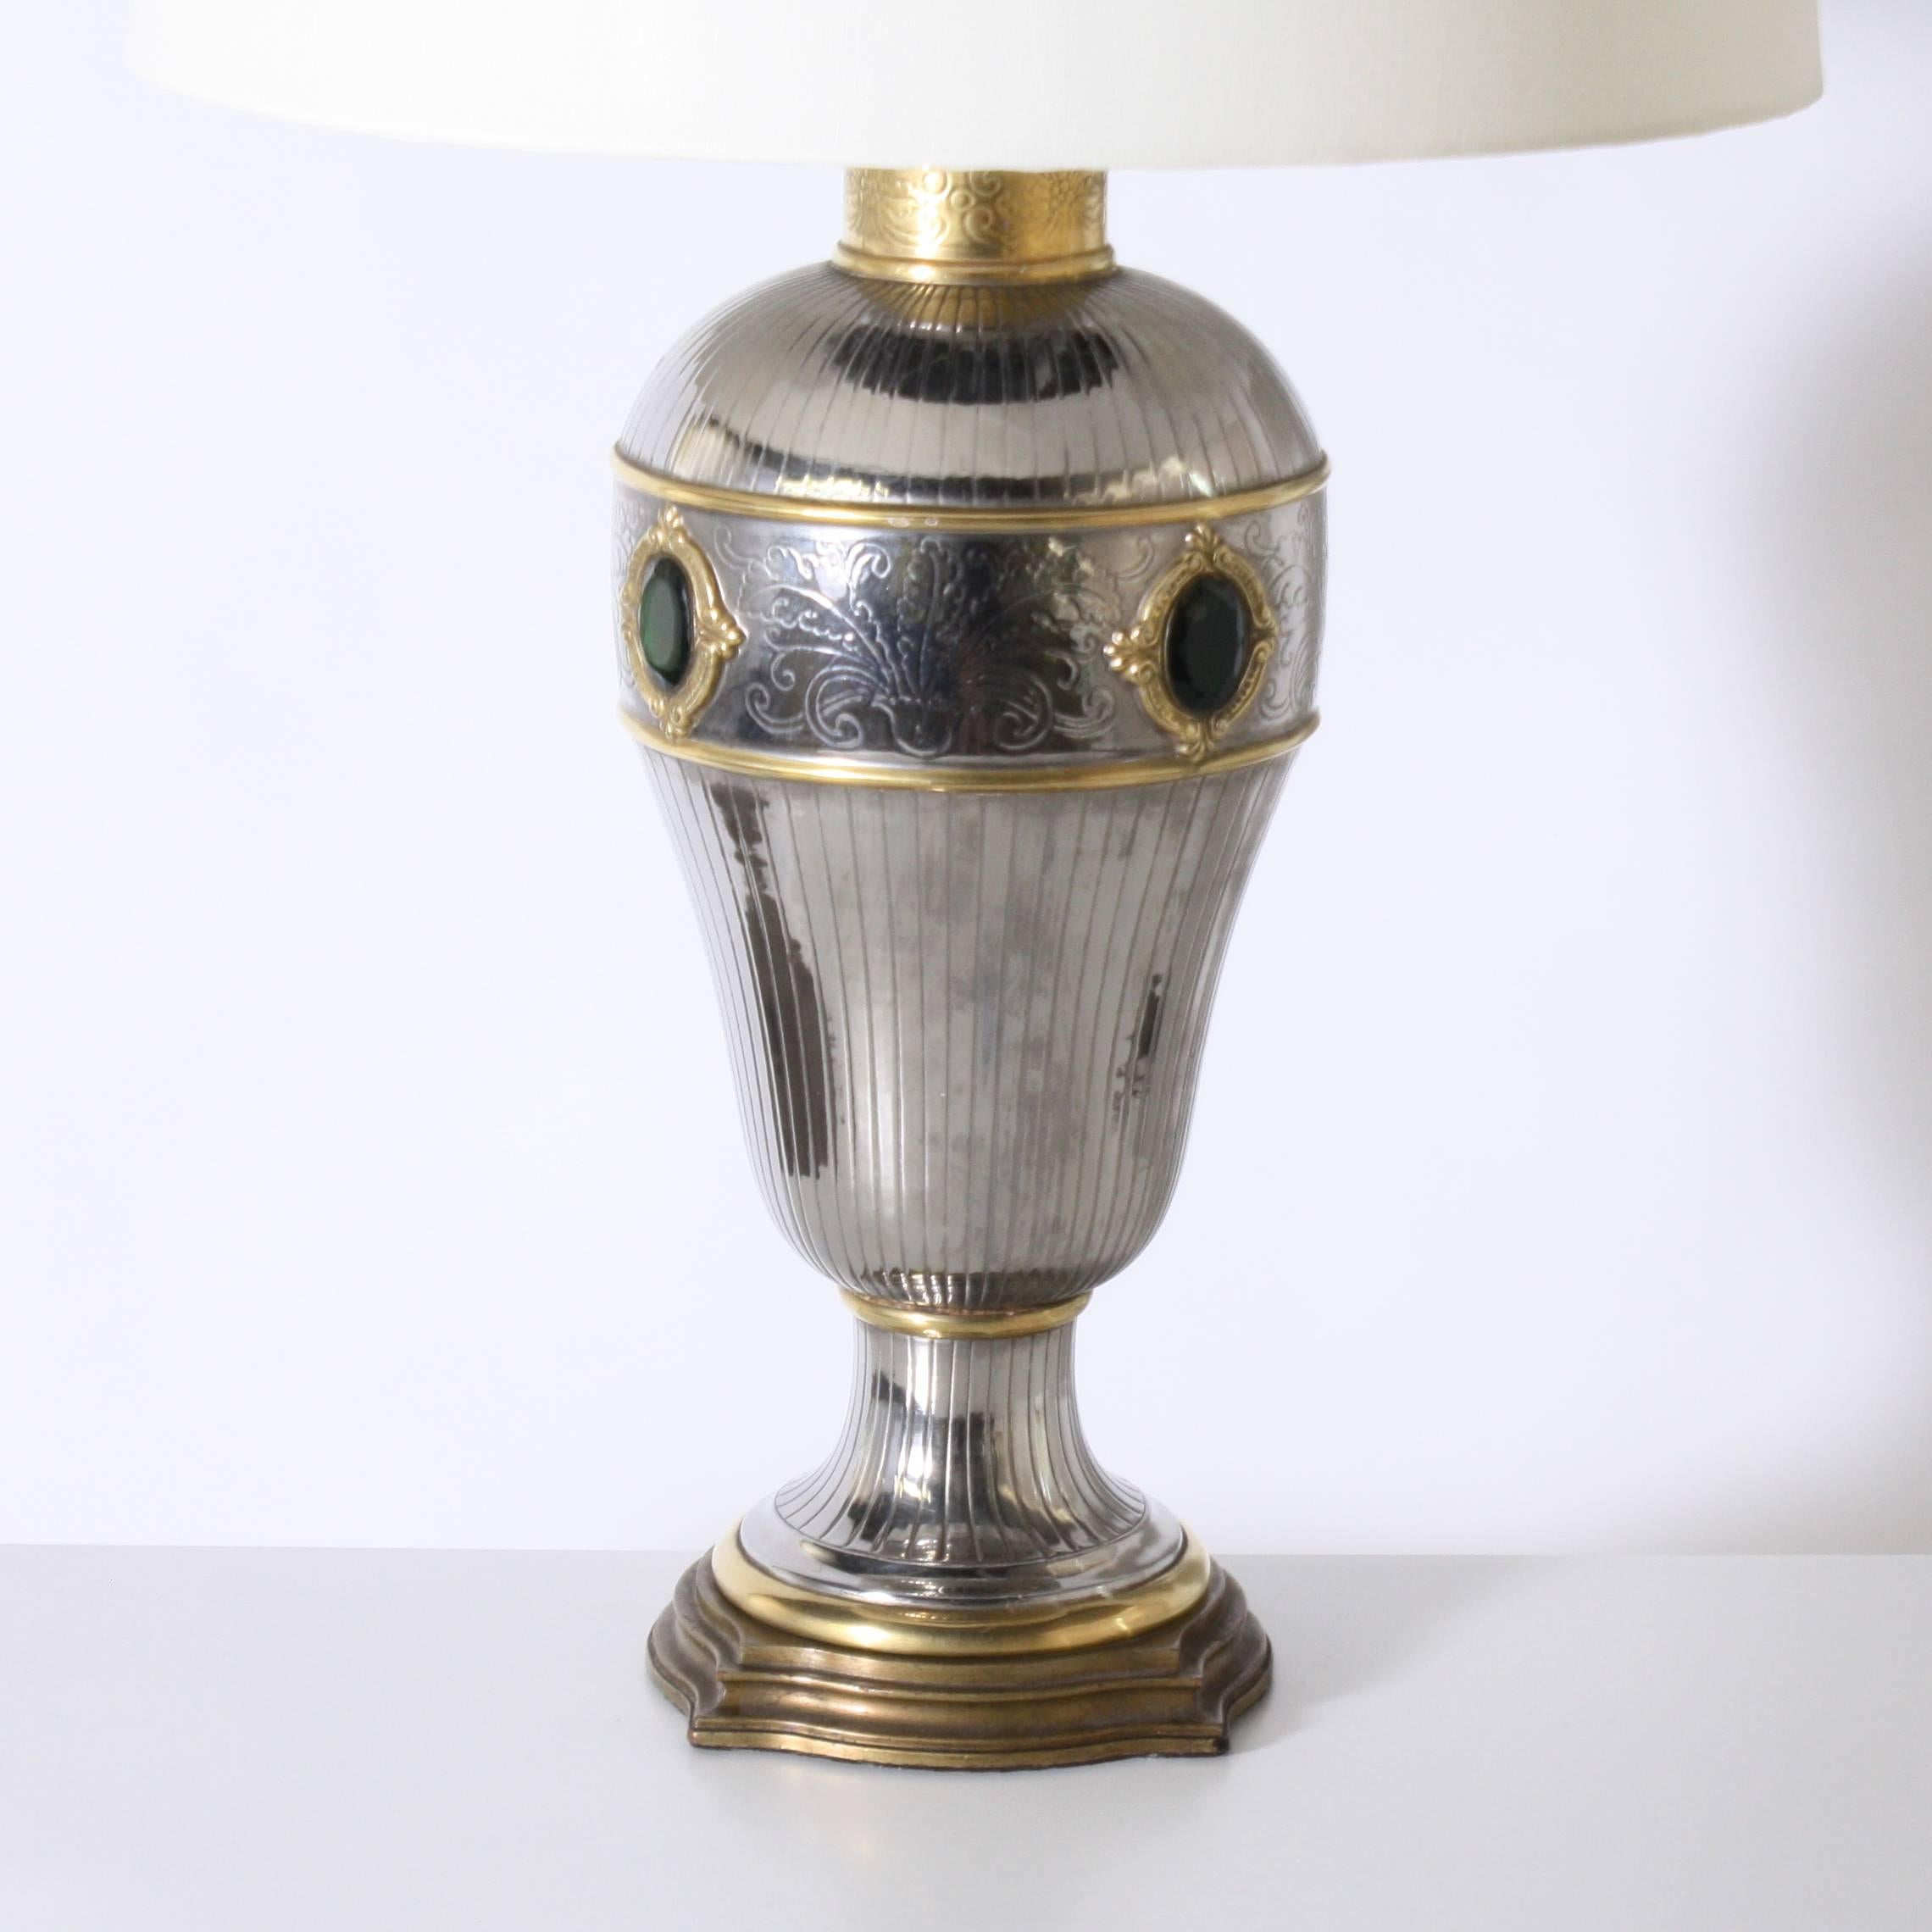 Monumental silver and brass Marbro lamp with faux emerald detail, circa 1950

Shade is 20" diameter X 32 1/2" overall height